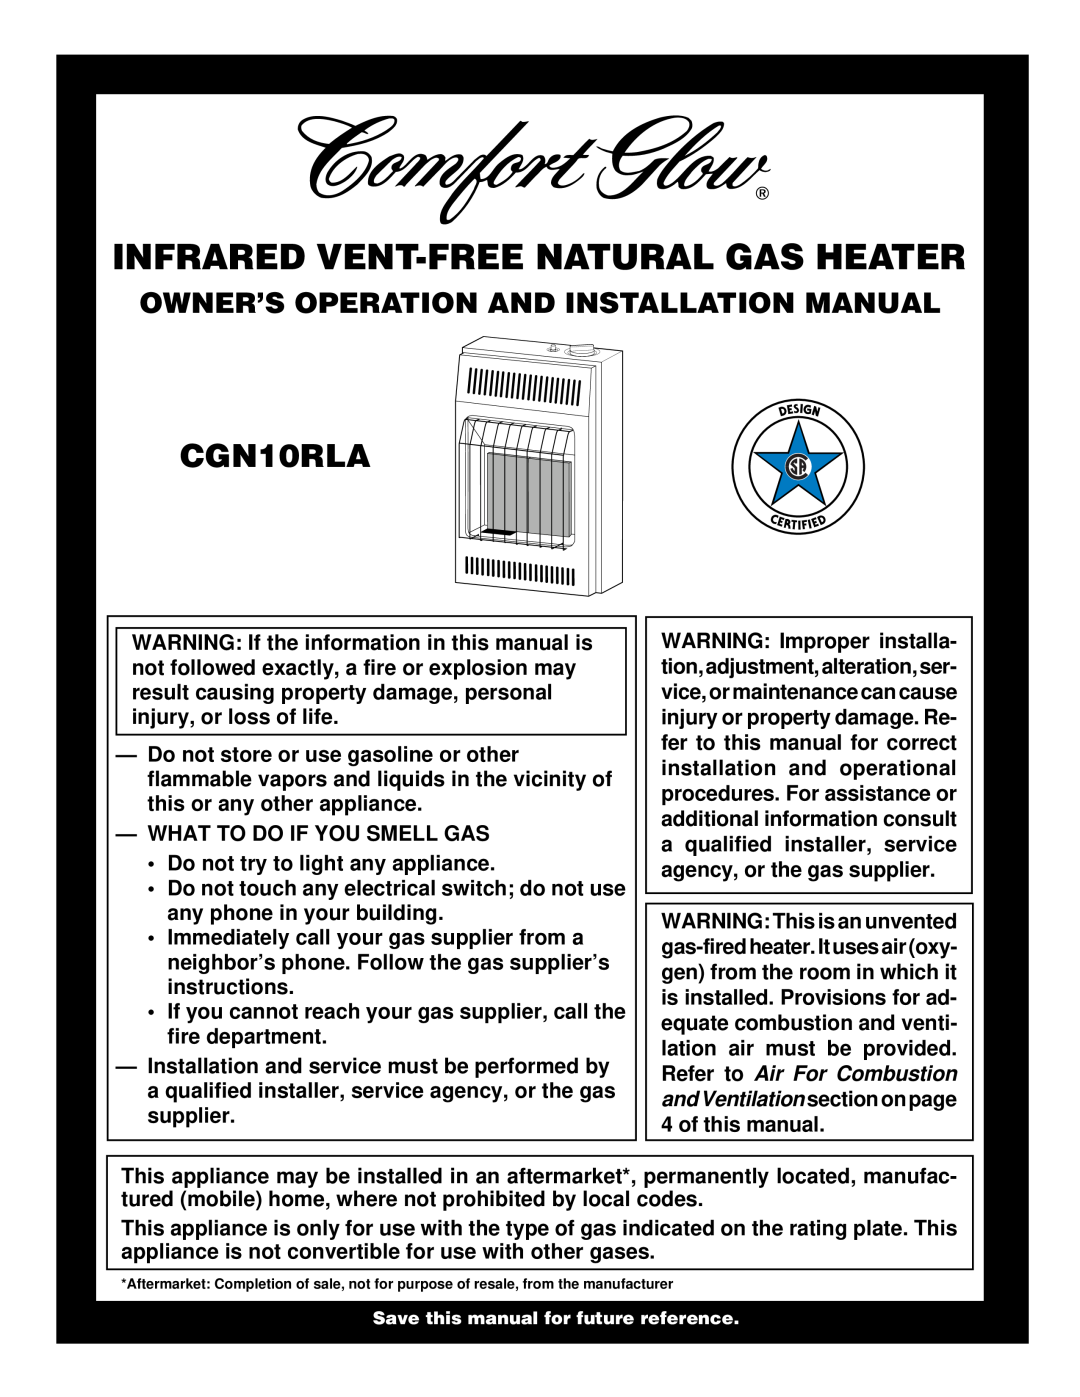 Desa CGN10RLA installation manual Infrared Vent-Freenatural Gas Heater, Owner’S Operation And Installation Manual 